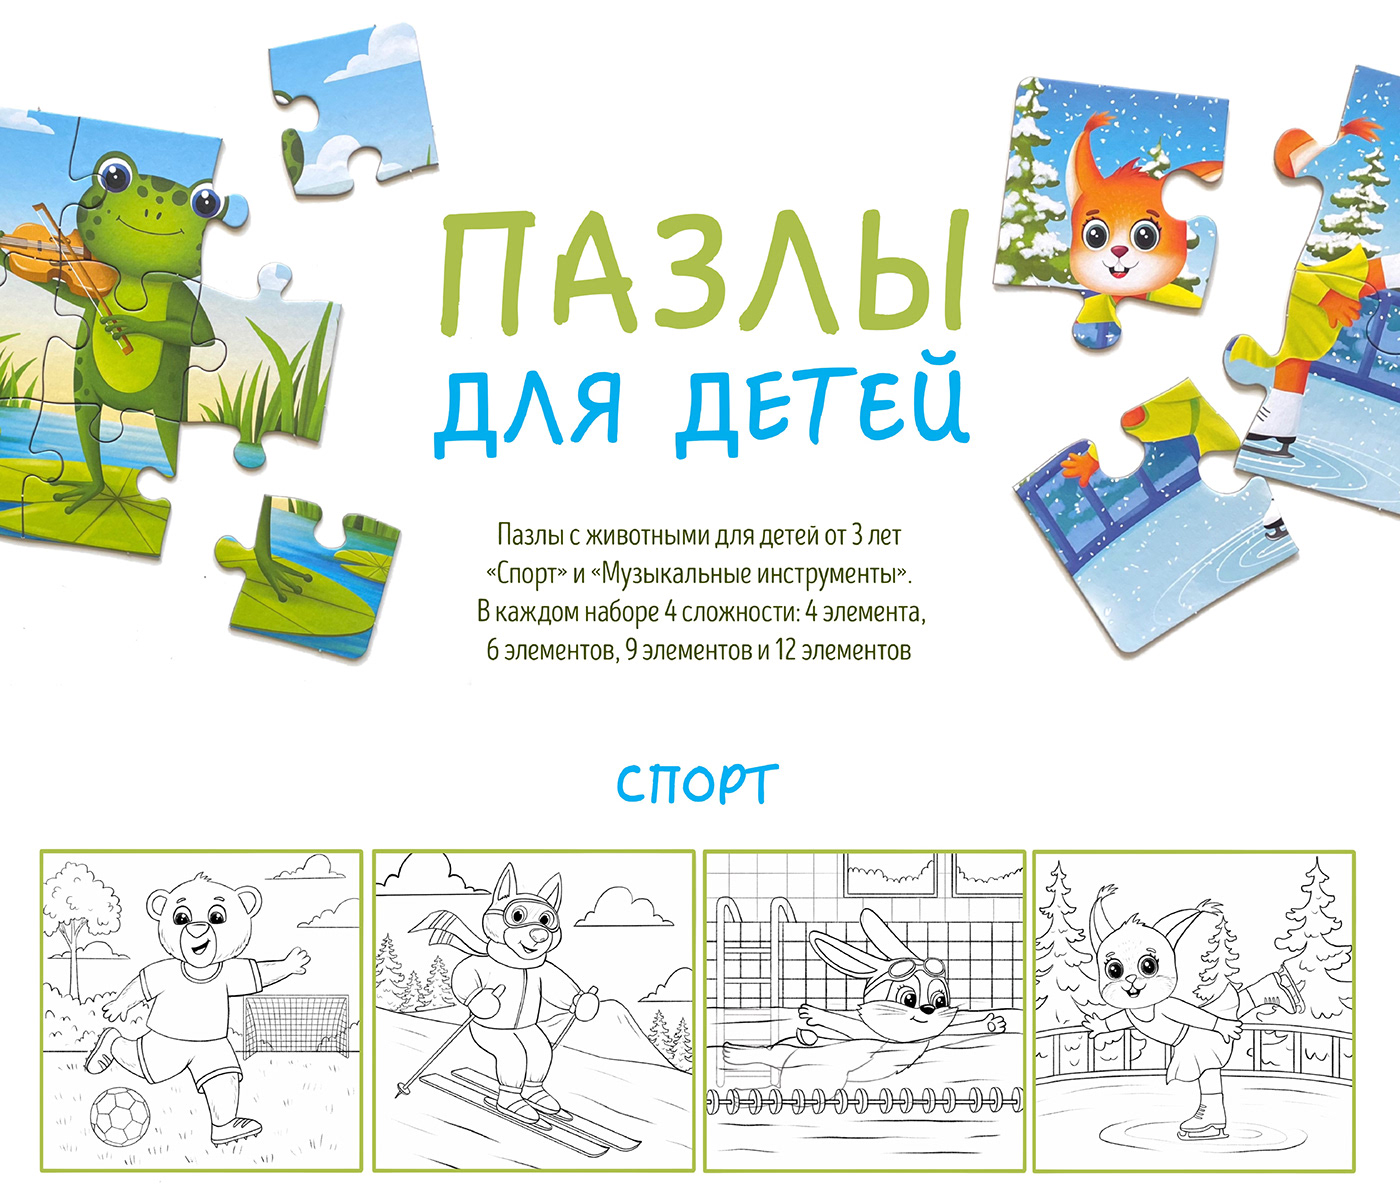 Puzzles for children with different difficulty levels